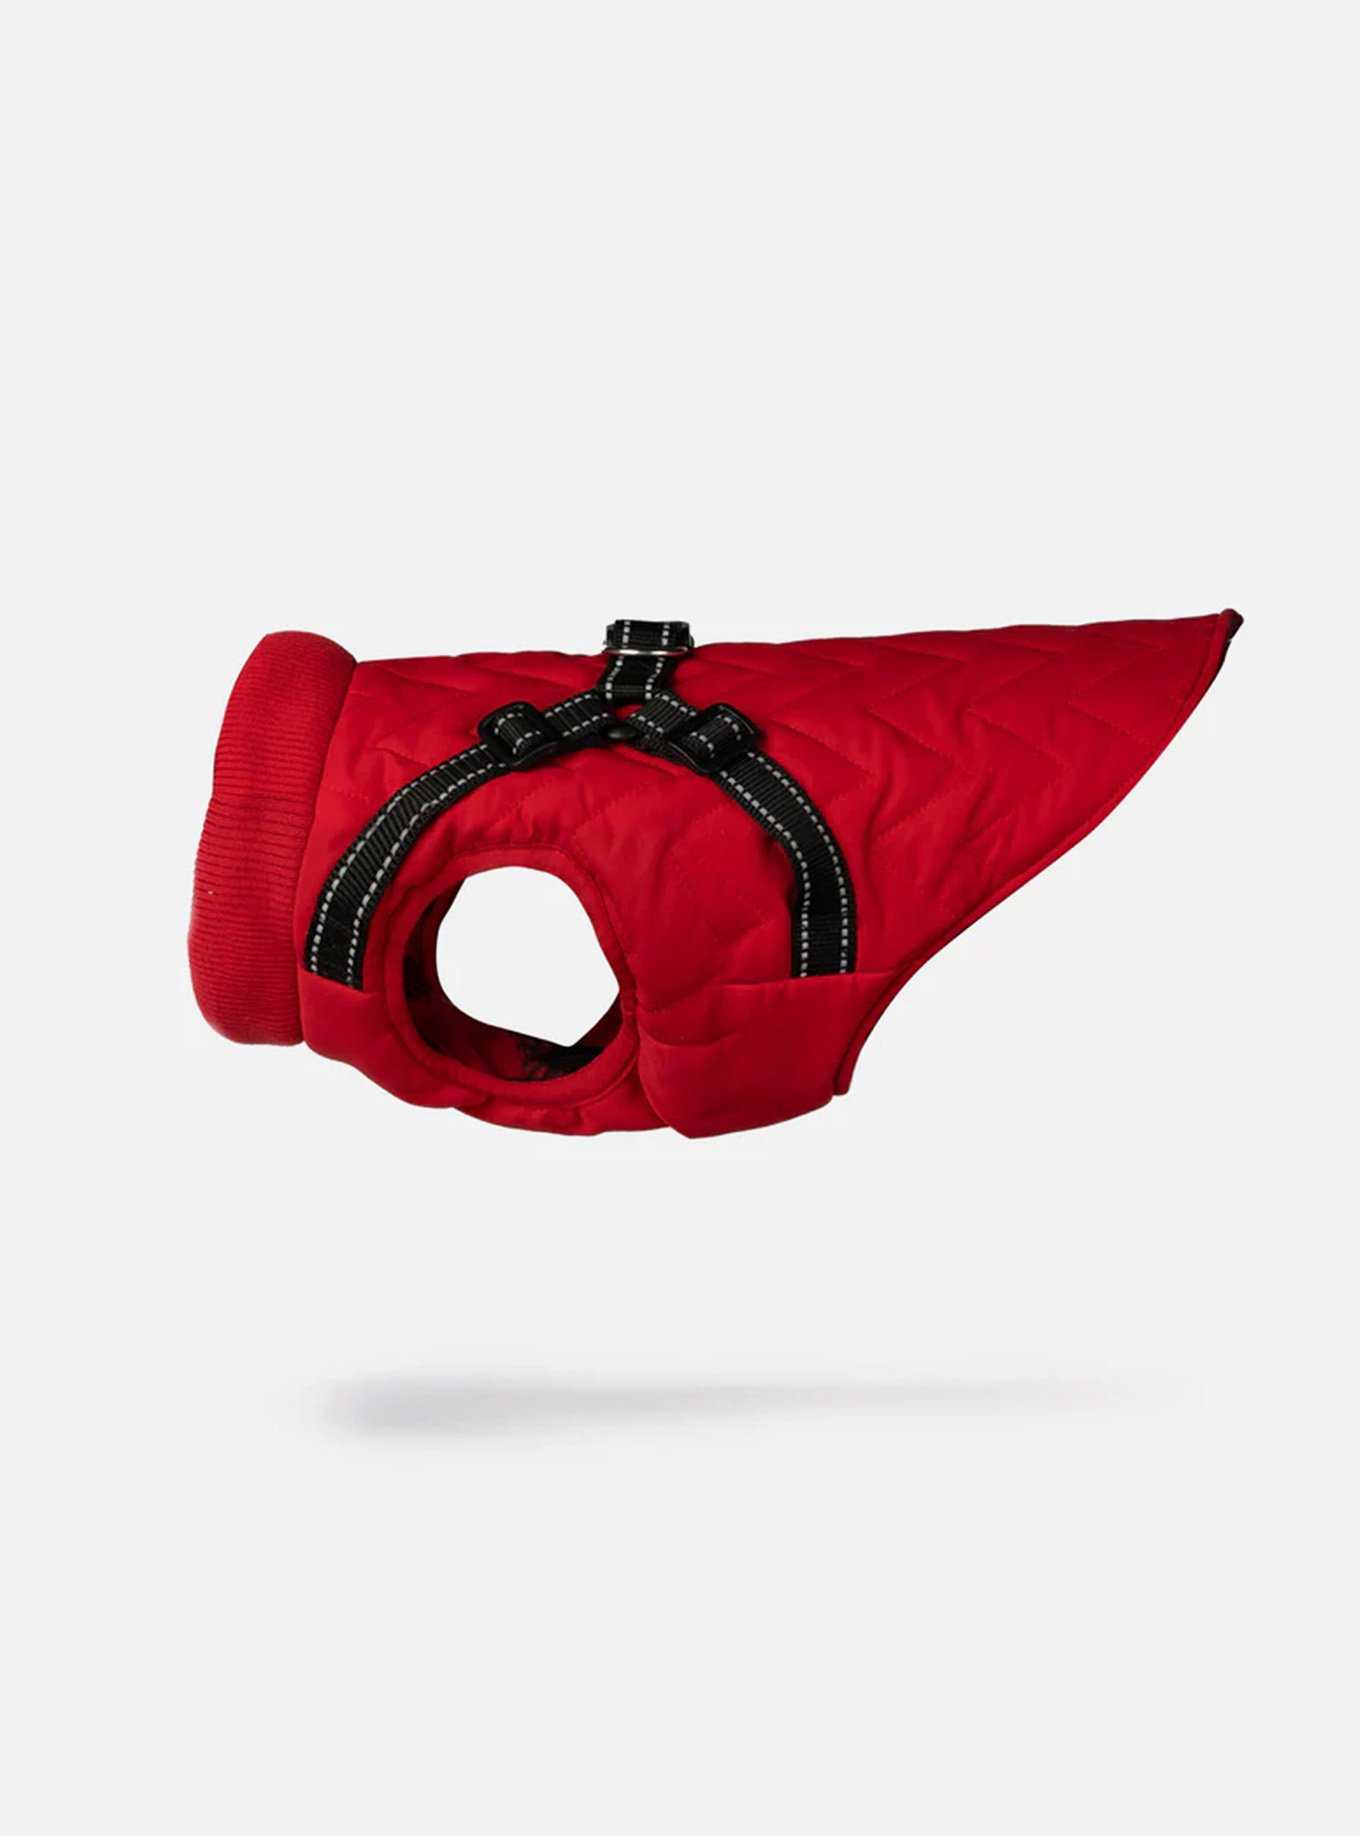 Quilted Dog Jacket With Built-In Harness Red, , hi-res